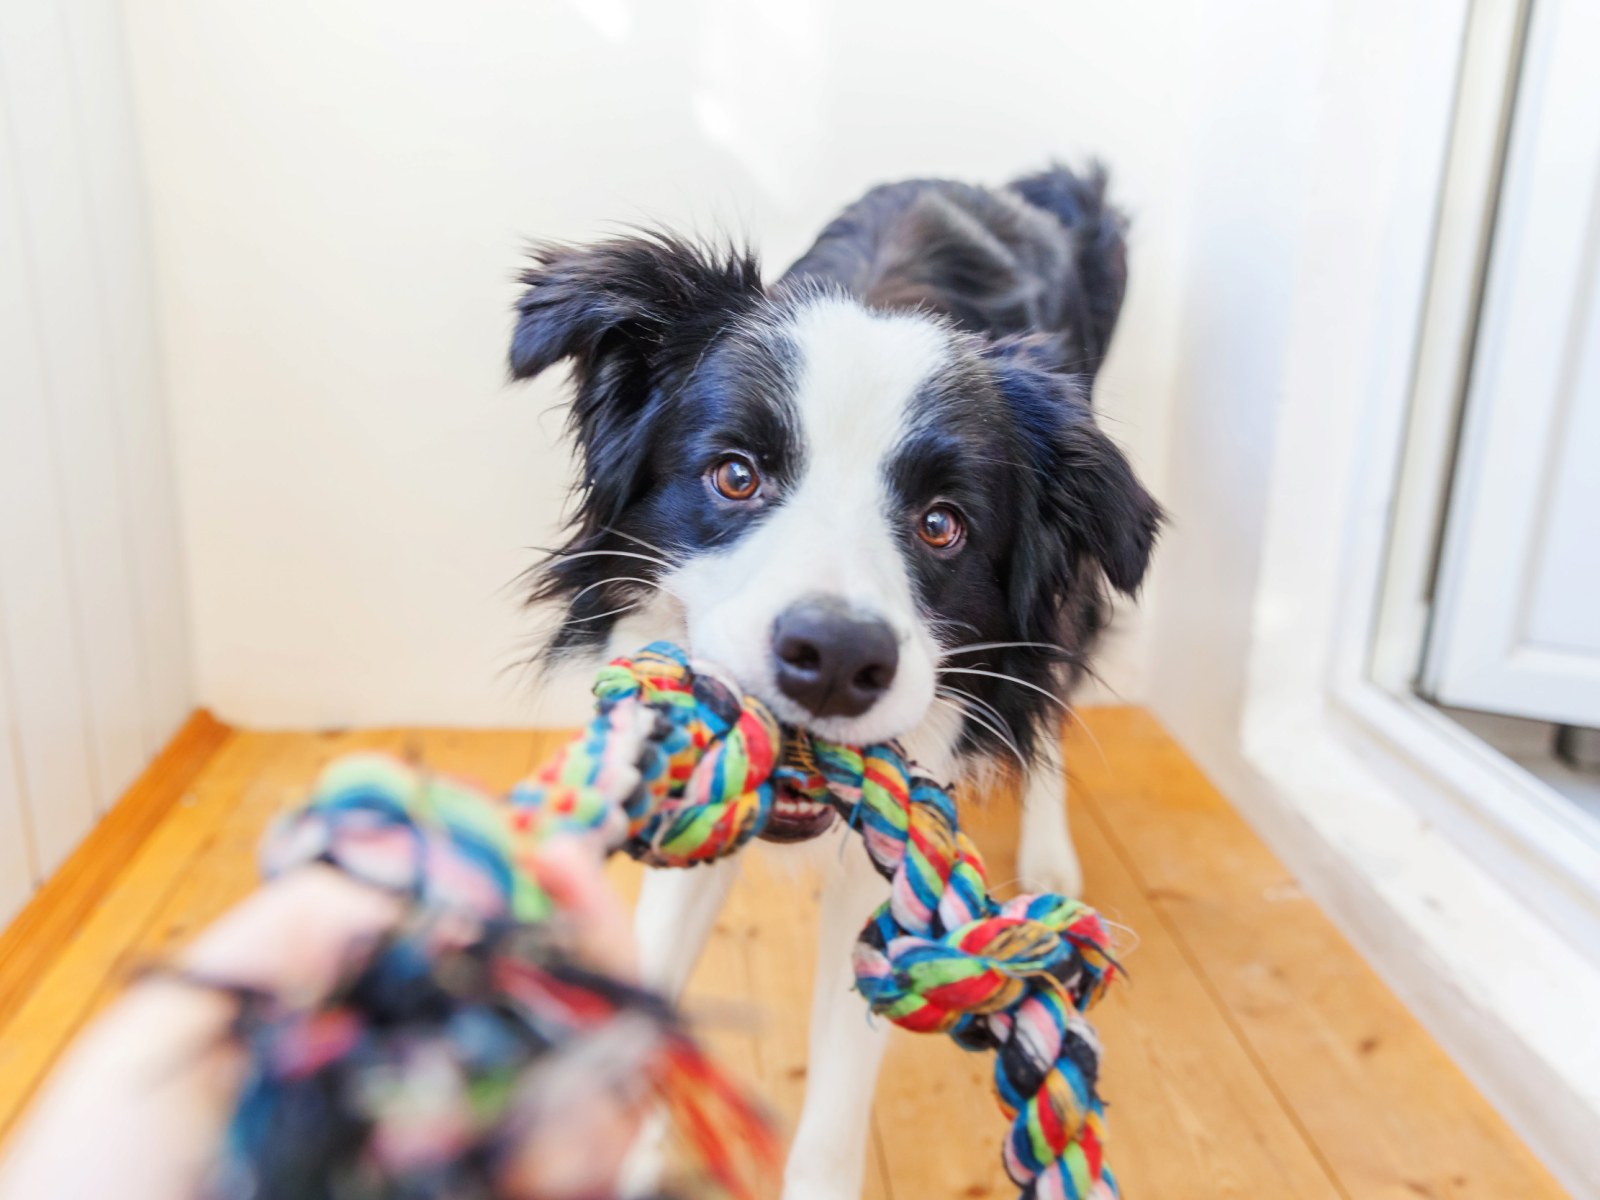 The 5 Best Enrichment Toys For Dogs